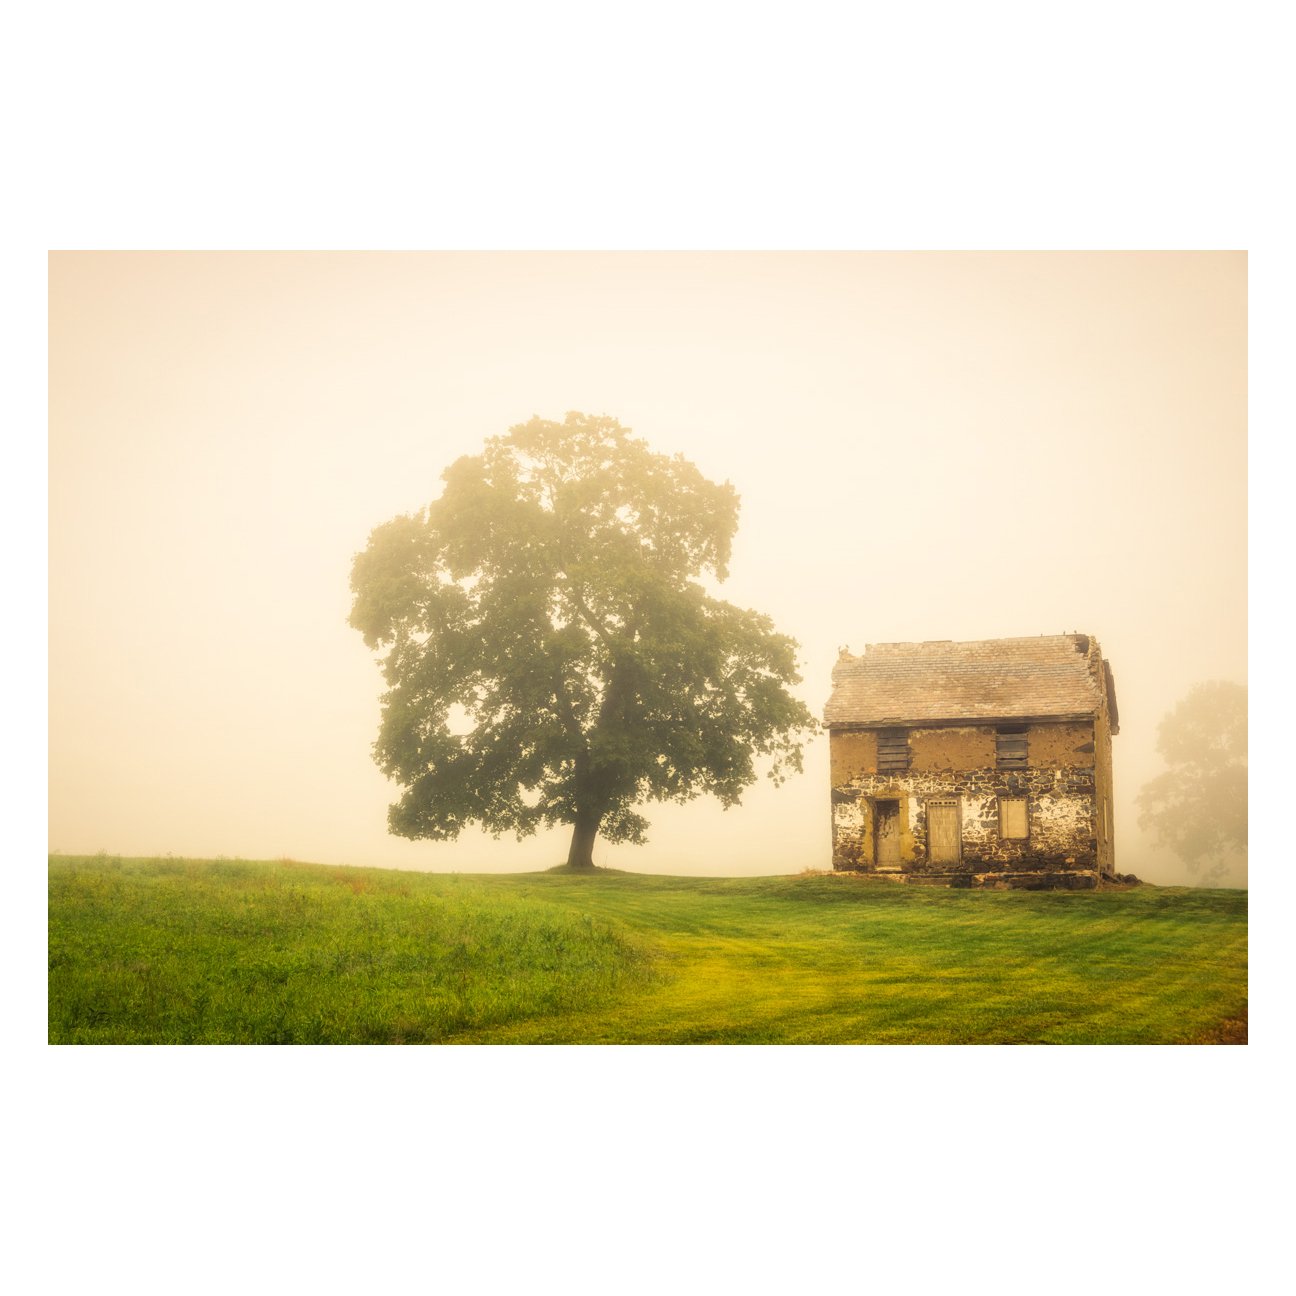 Country Wall Art Ideas: Abandoned House Rural Landscape Photo Fine Art Canvas Wall Art Prints  - PIPAFINEART